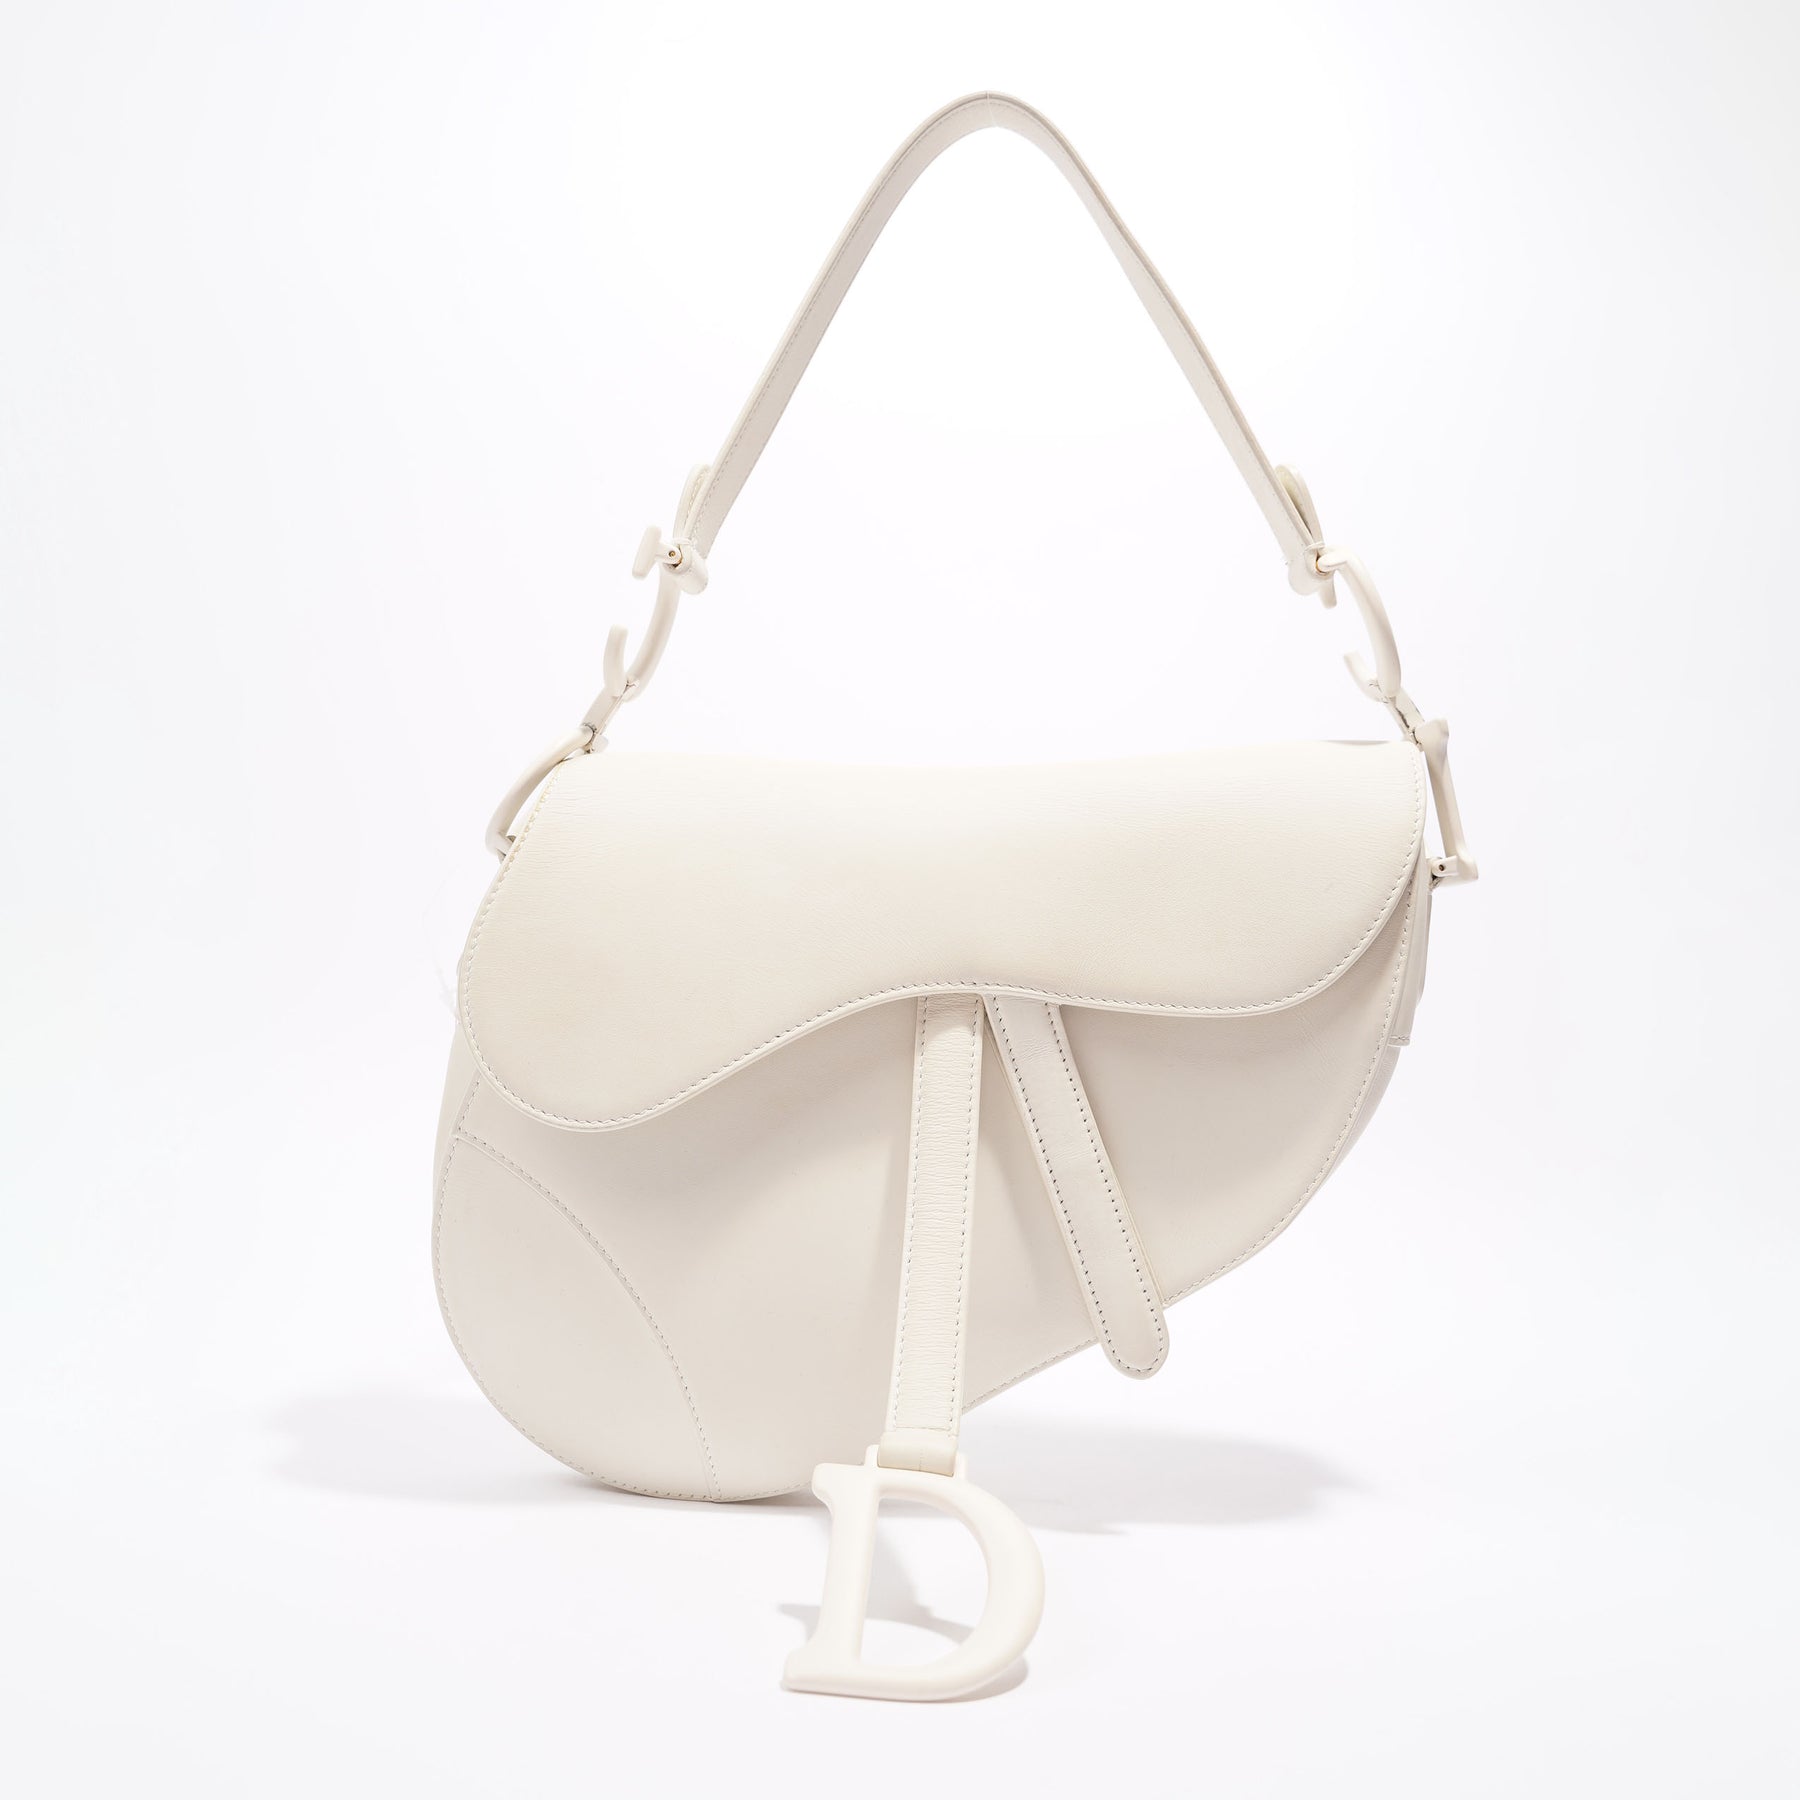 Christian Dior White Leather Saddle Bag with Silver D Charm